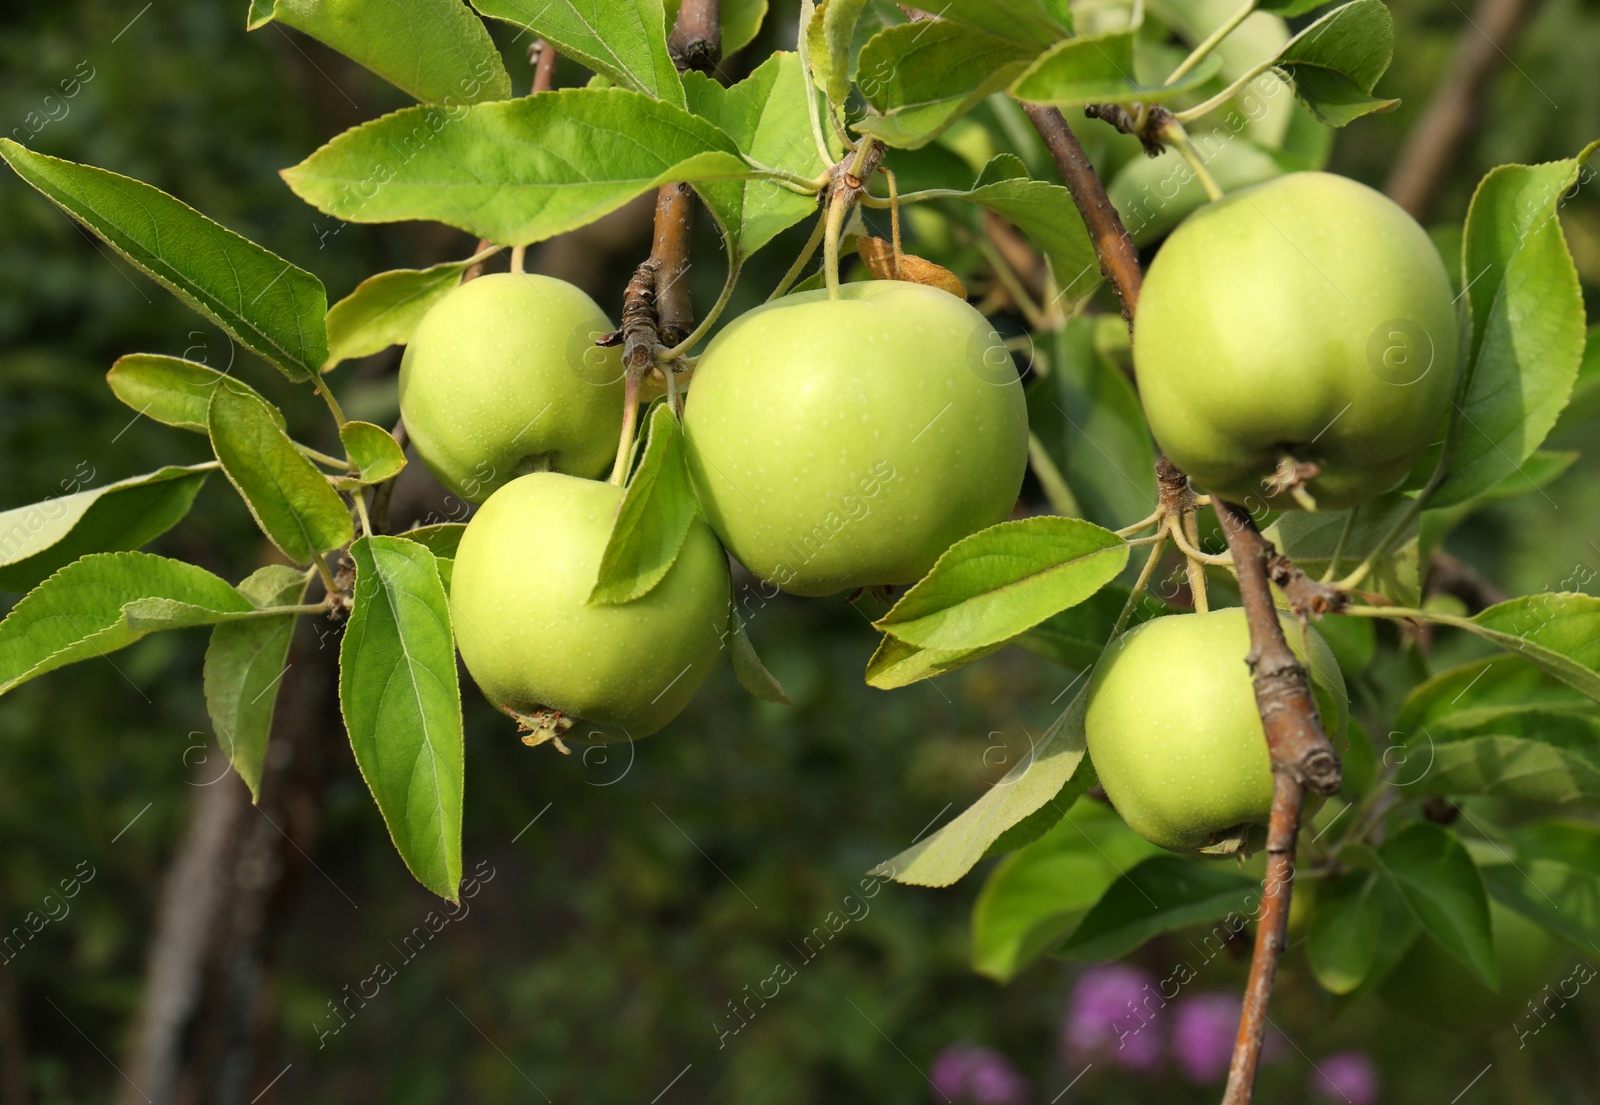 Photo of Green apples and leaves on tree branches in garden